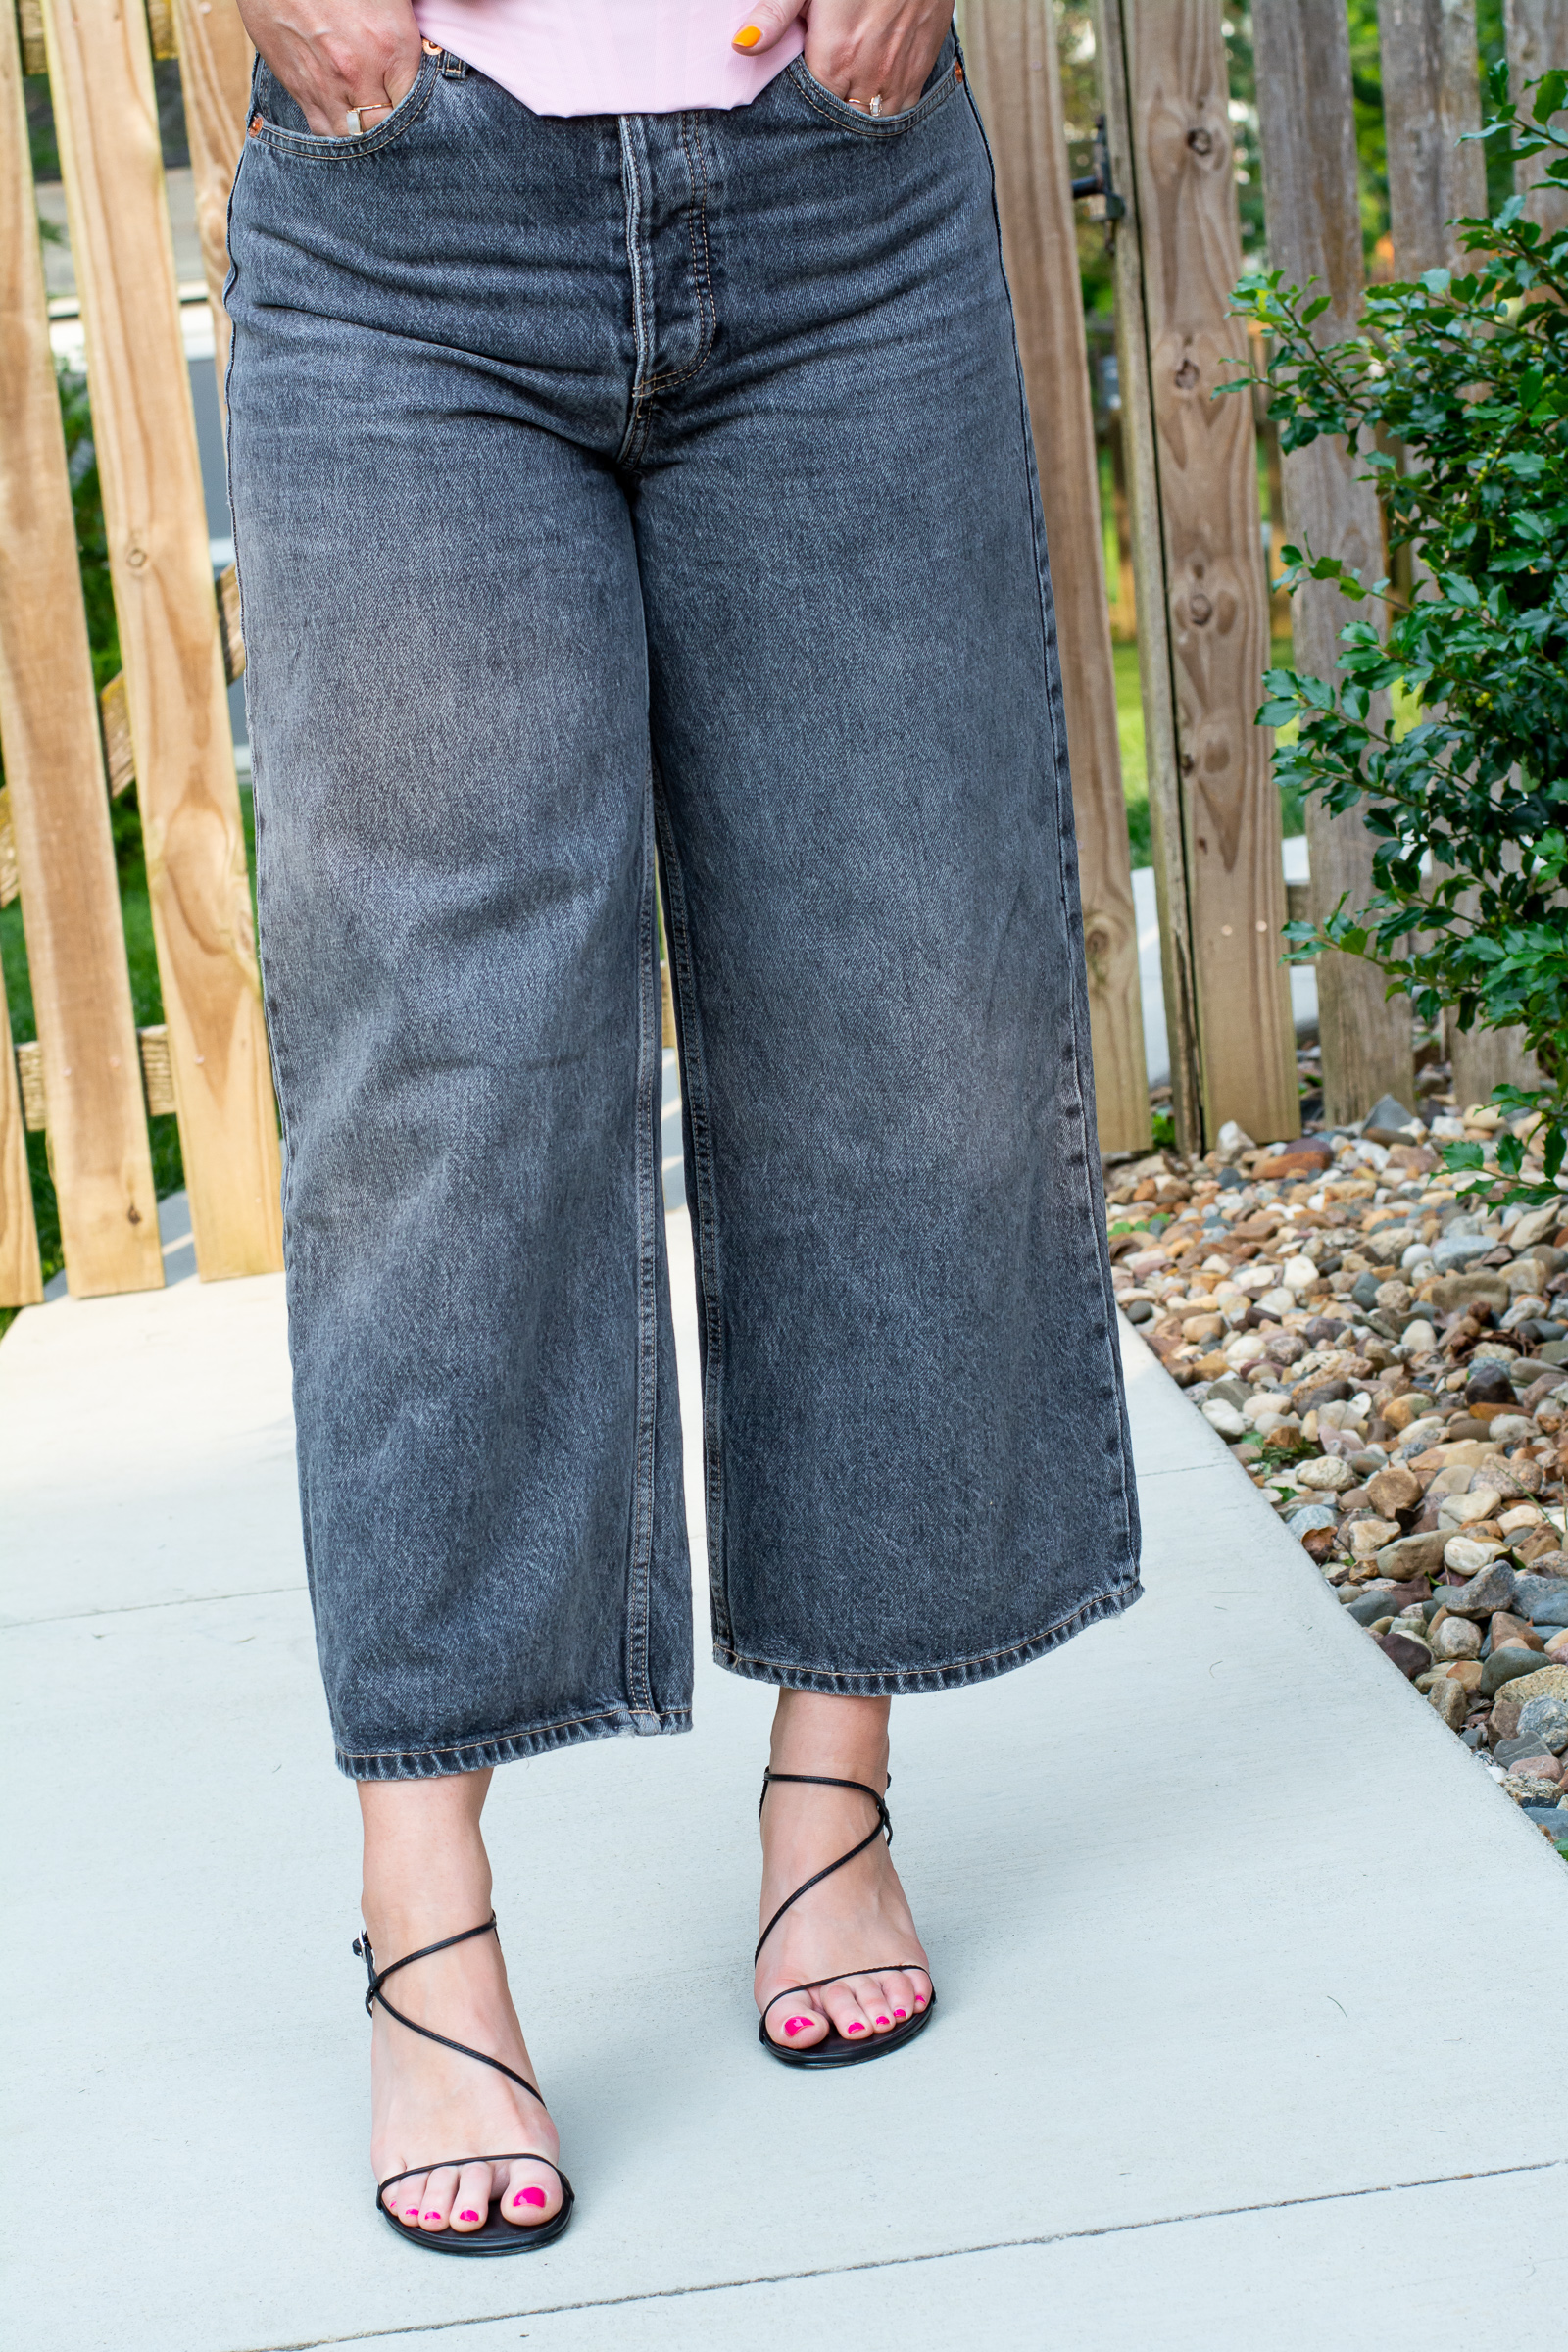 Strappy 90s Sandals + Wide-Leg Jeans. | LSR